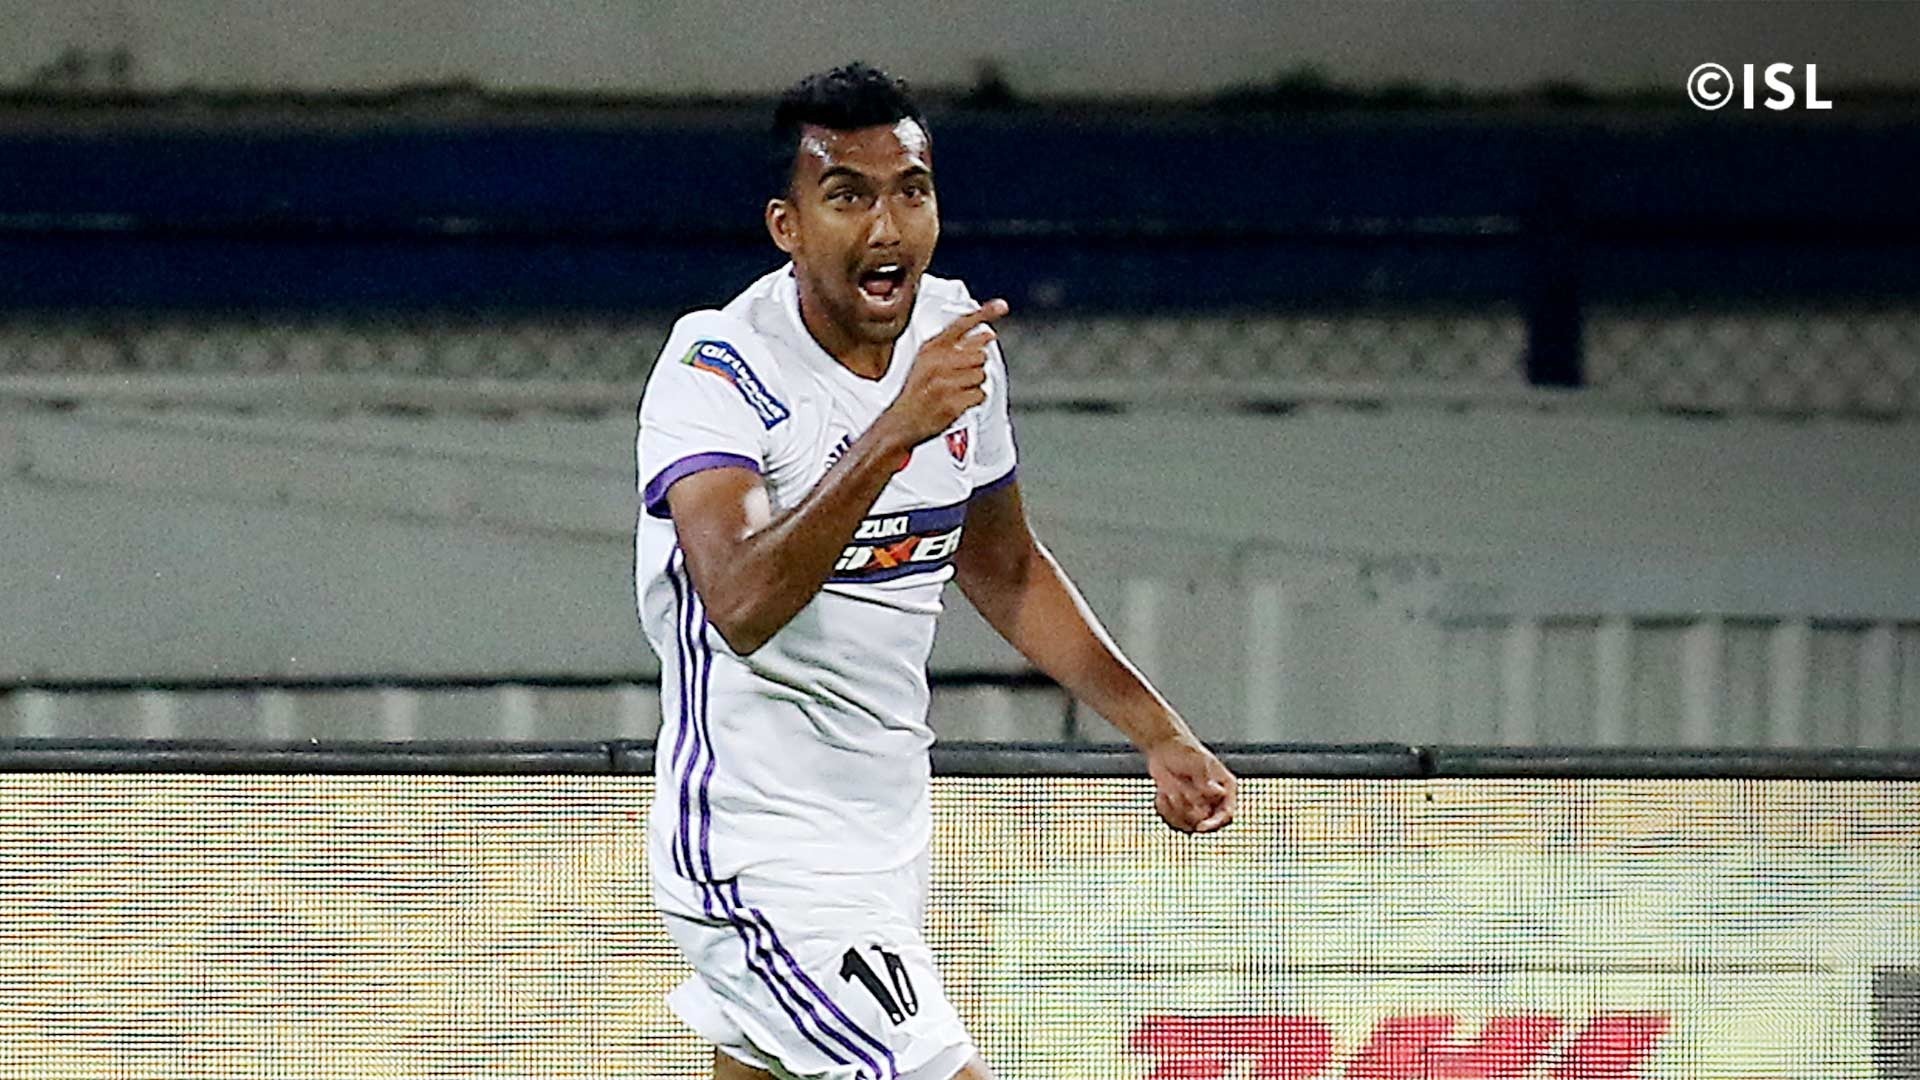 ISL 2021-22 | Bengaluru FC ropes in Indian defender Sarthak Golui on a two-year deal